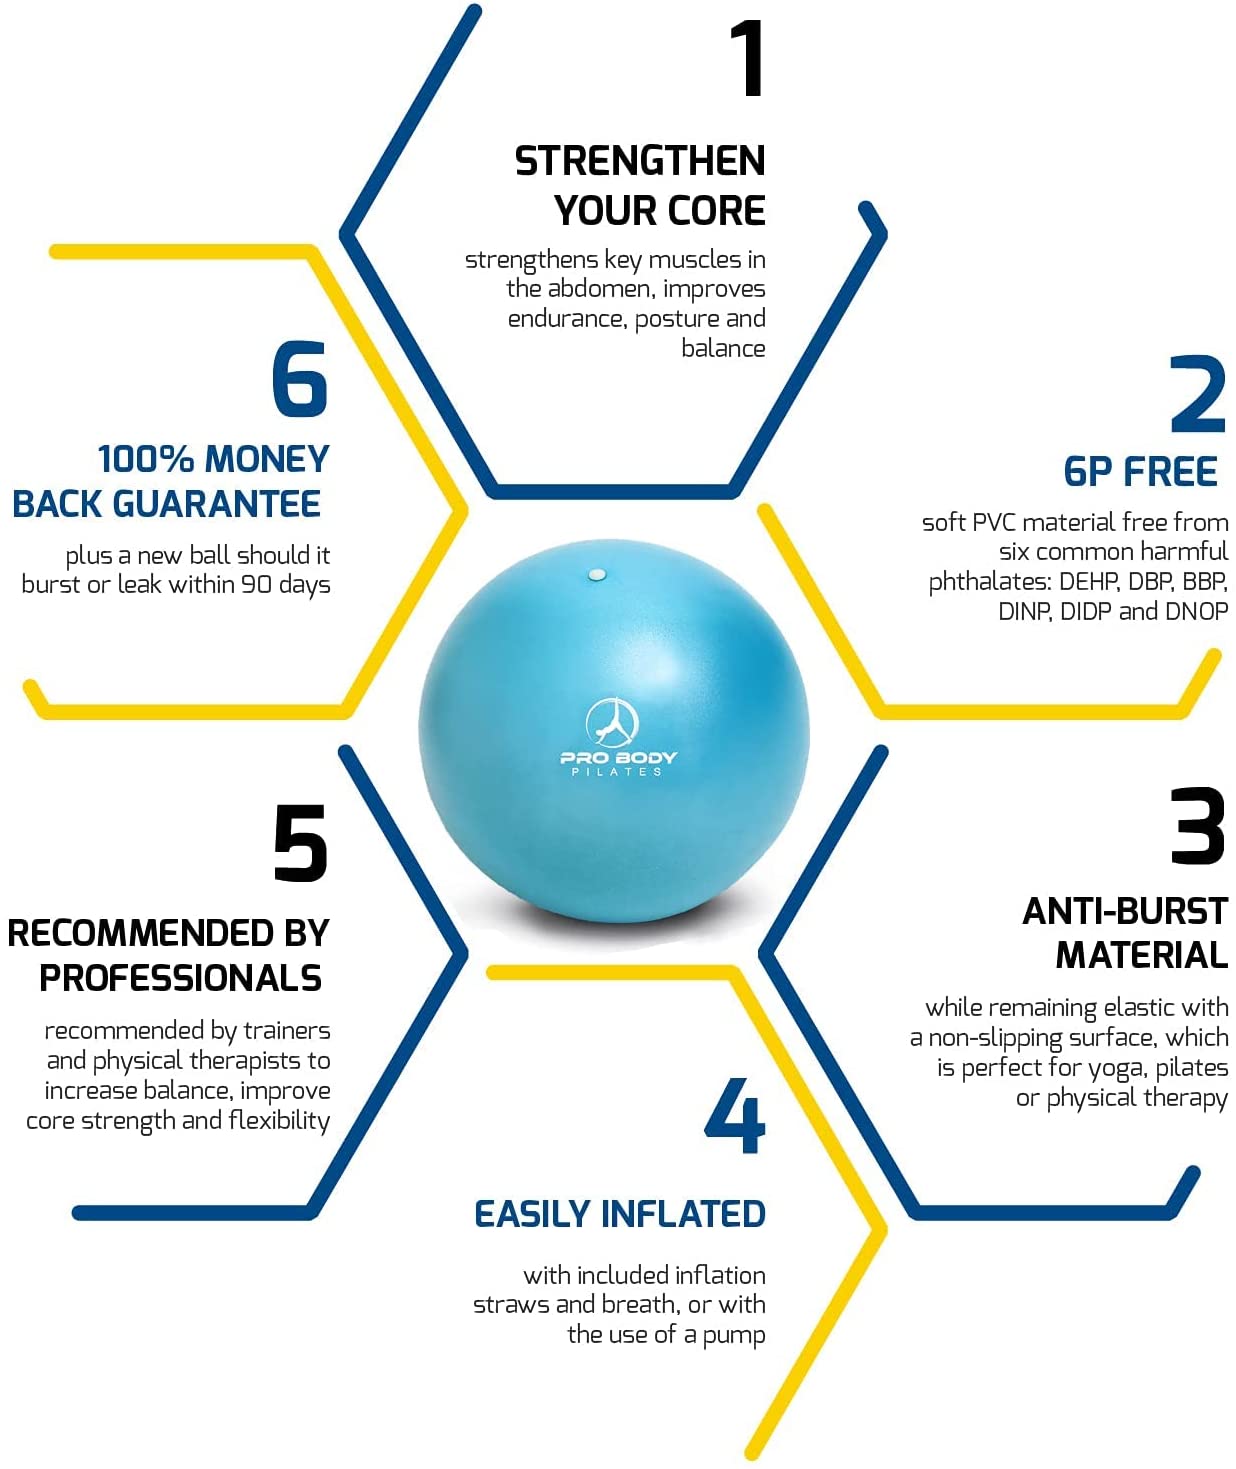 TopBine 9 Inch Exercise Pilates Ball -(2 Pcs) Stability Ball for Yoga,  Barre, Training and Physical Therapy- Improves Balance, Core Strength, Back  Pain & Posture- Comes with Inflatable Straw